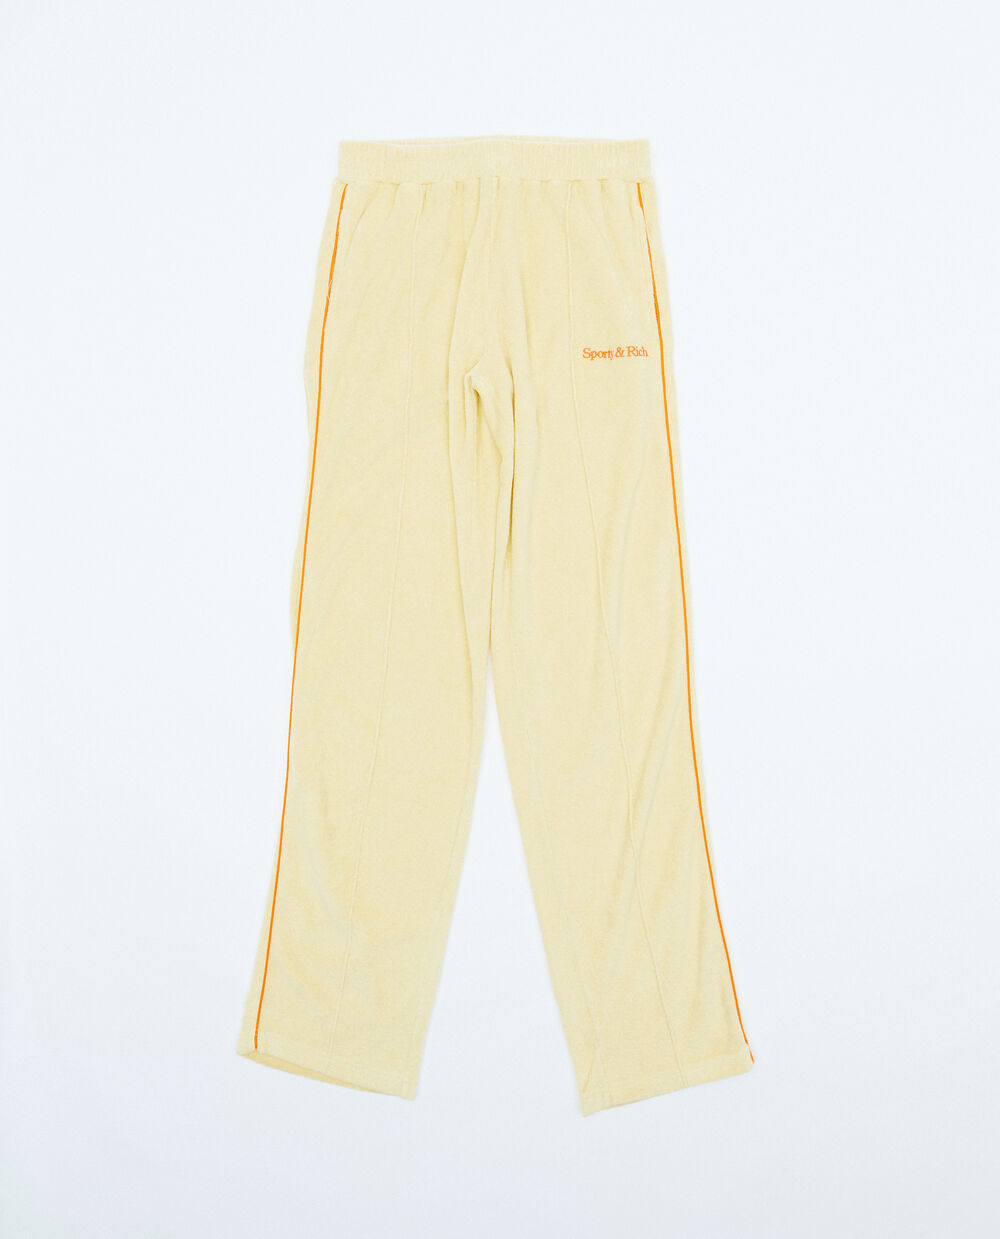 SPORTY & RICH NEW SERIF TRACK PANT